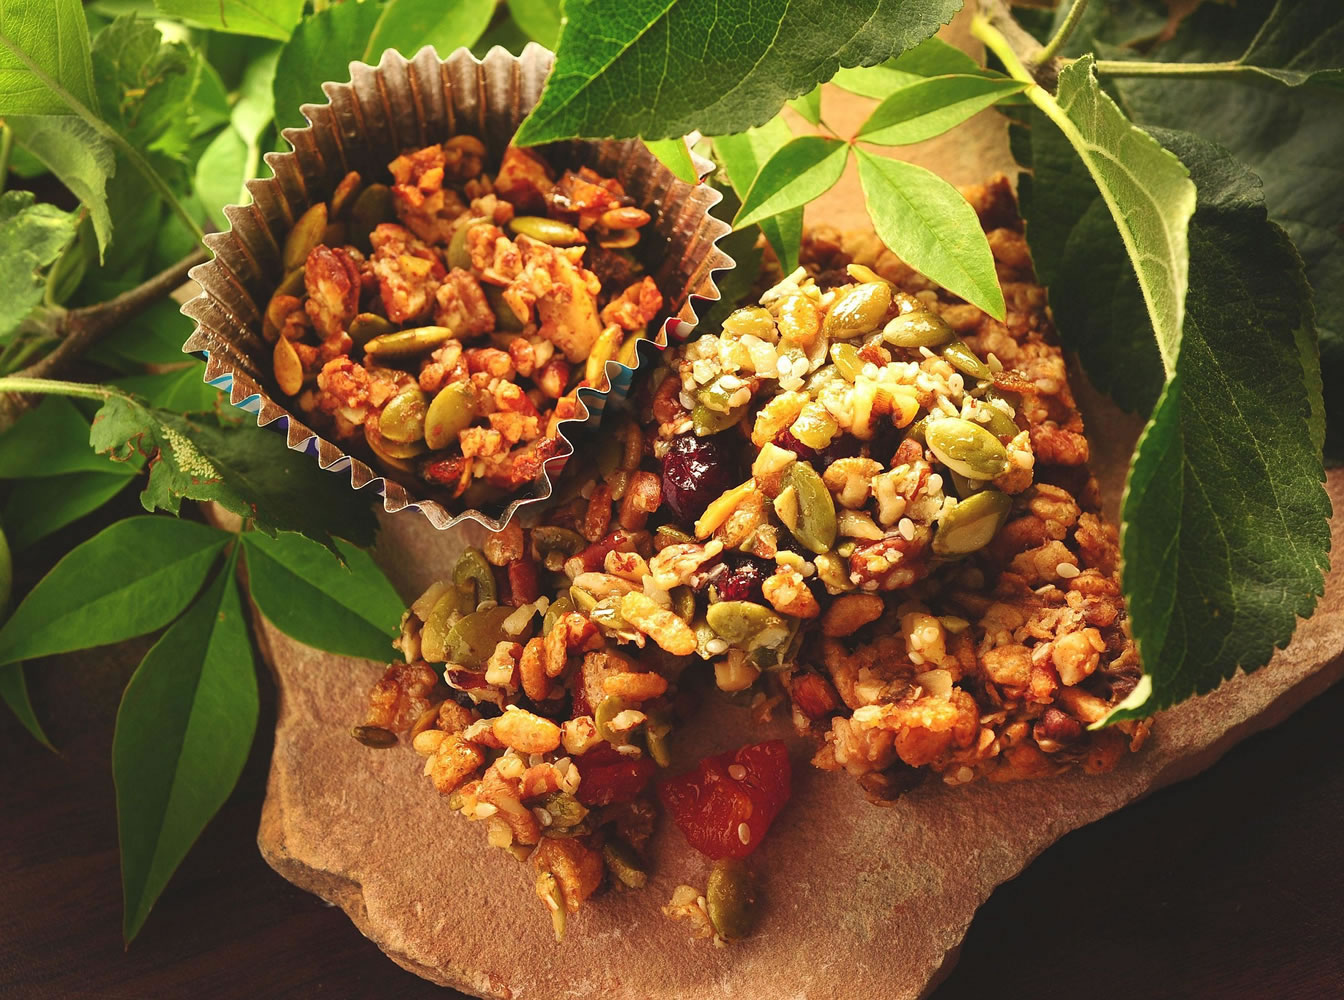 Hit the outdoors with a batch of homemade trail mix and granola bars.